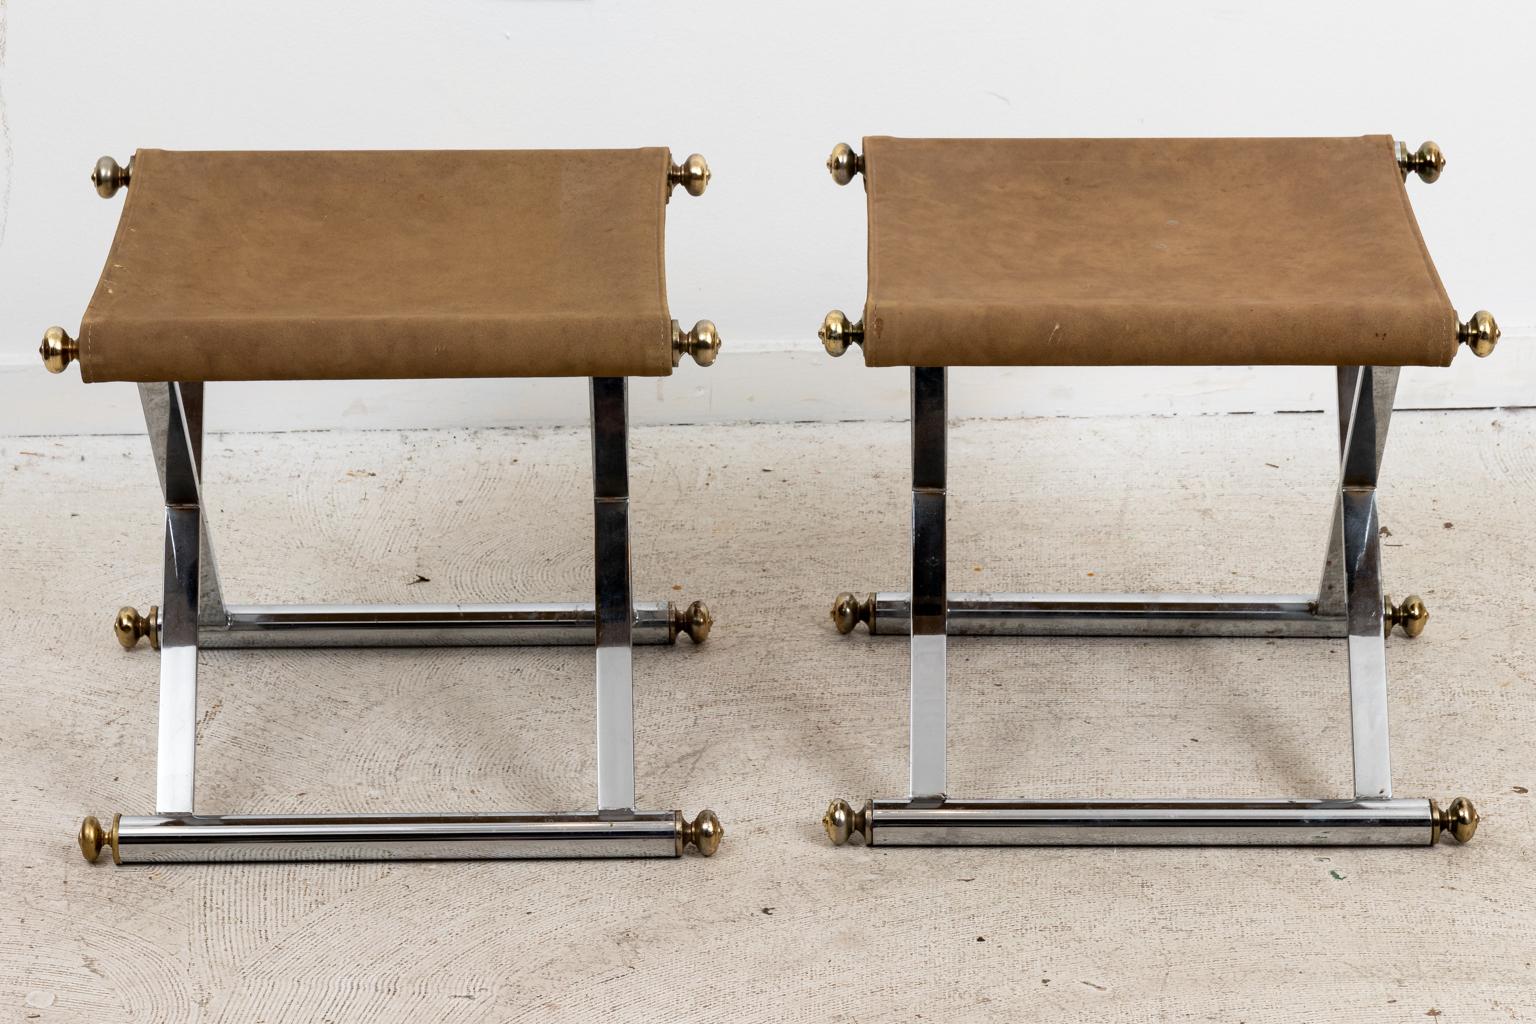 Circa 1970s pair of chrome and suede upholstered x-base benches with brass ball finials. Please note of wear consistent with age including replacement of one finial and minor patina.